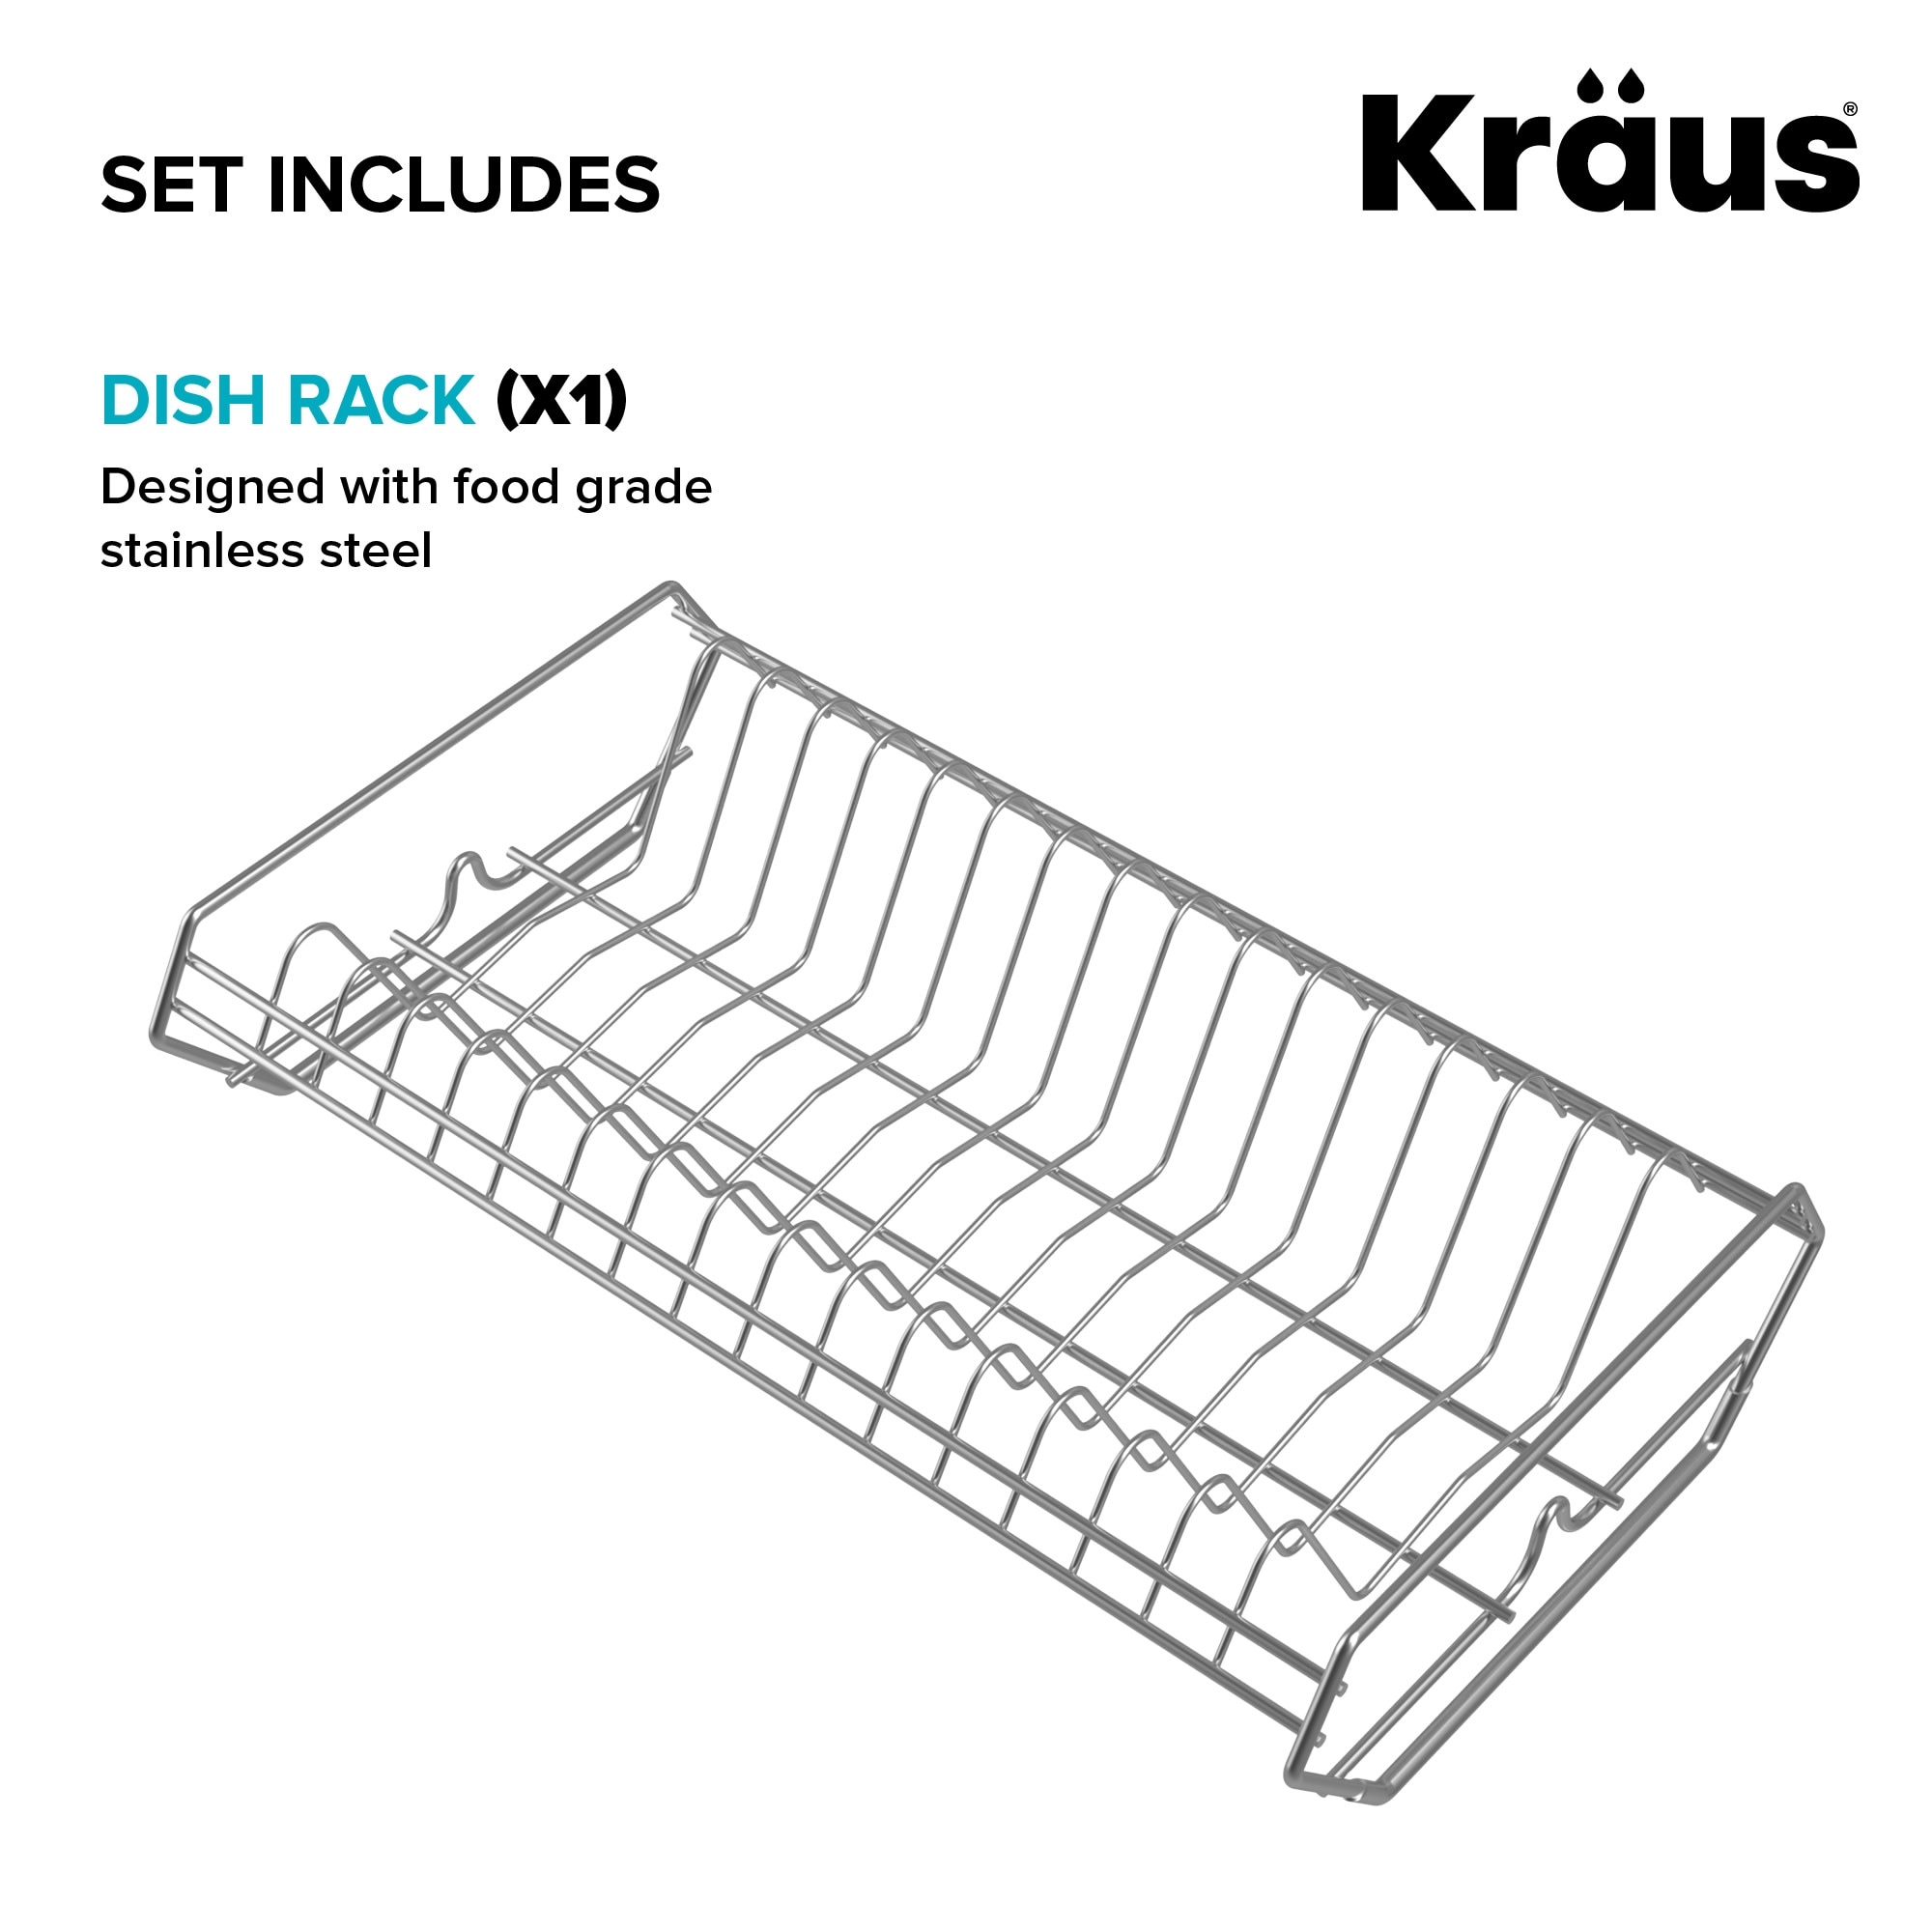 Kraus KDR-1 Kore Stainless Steel Dish Rack for Workstation Kitchen - Stainless Steel